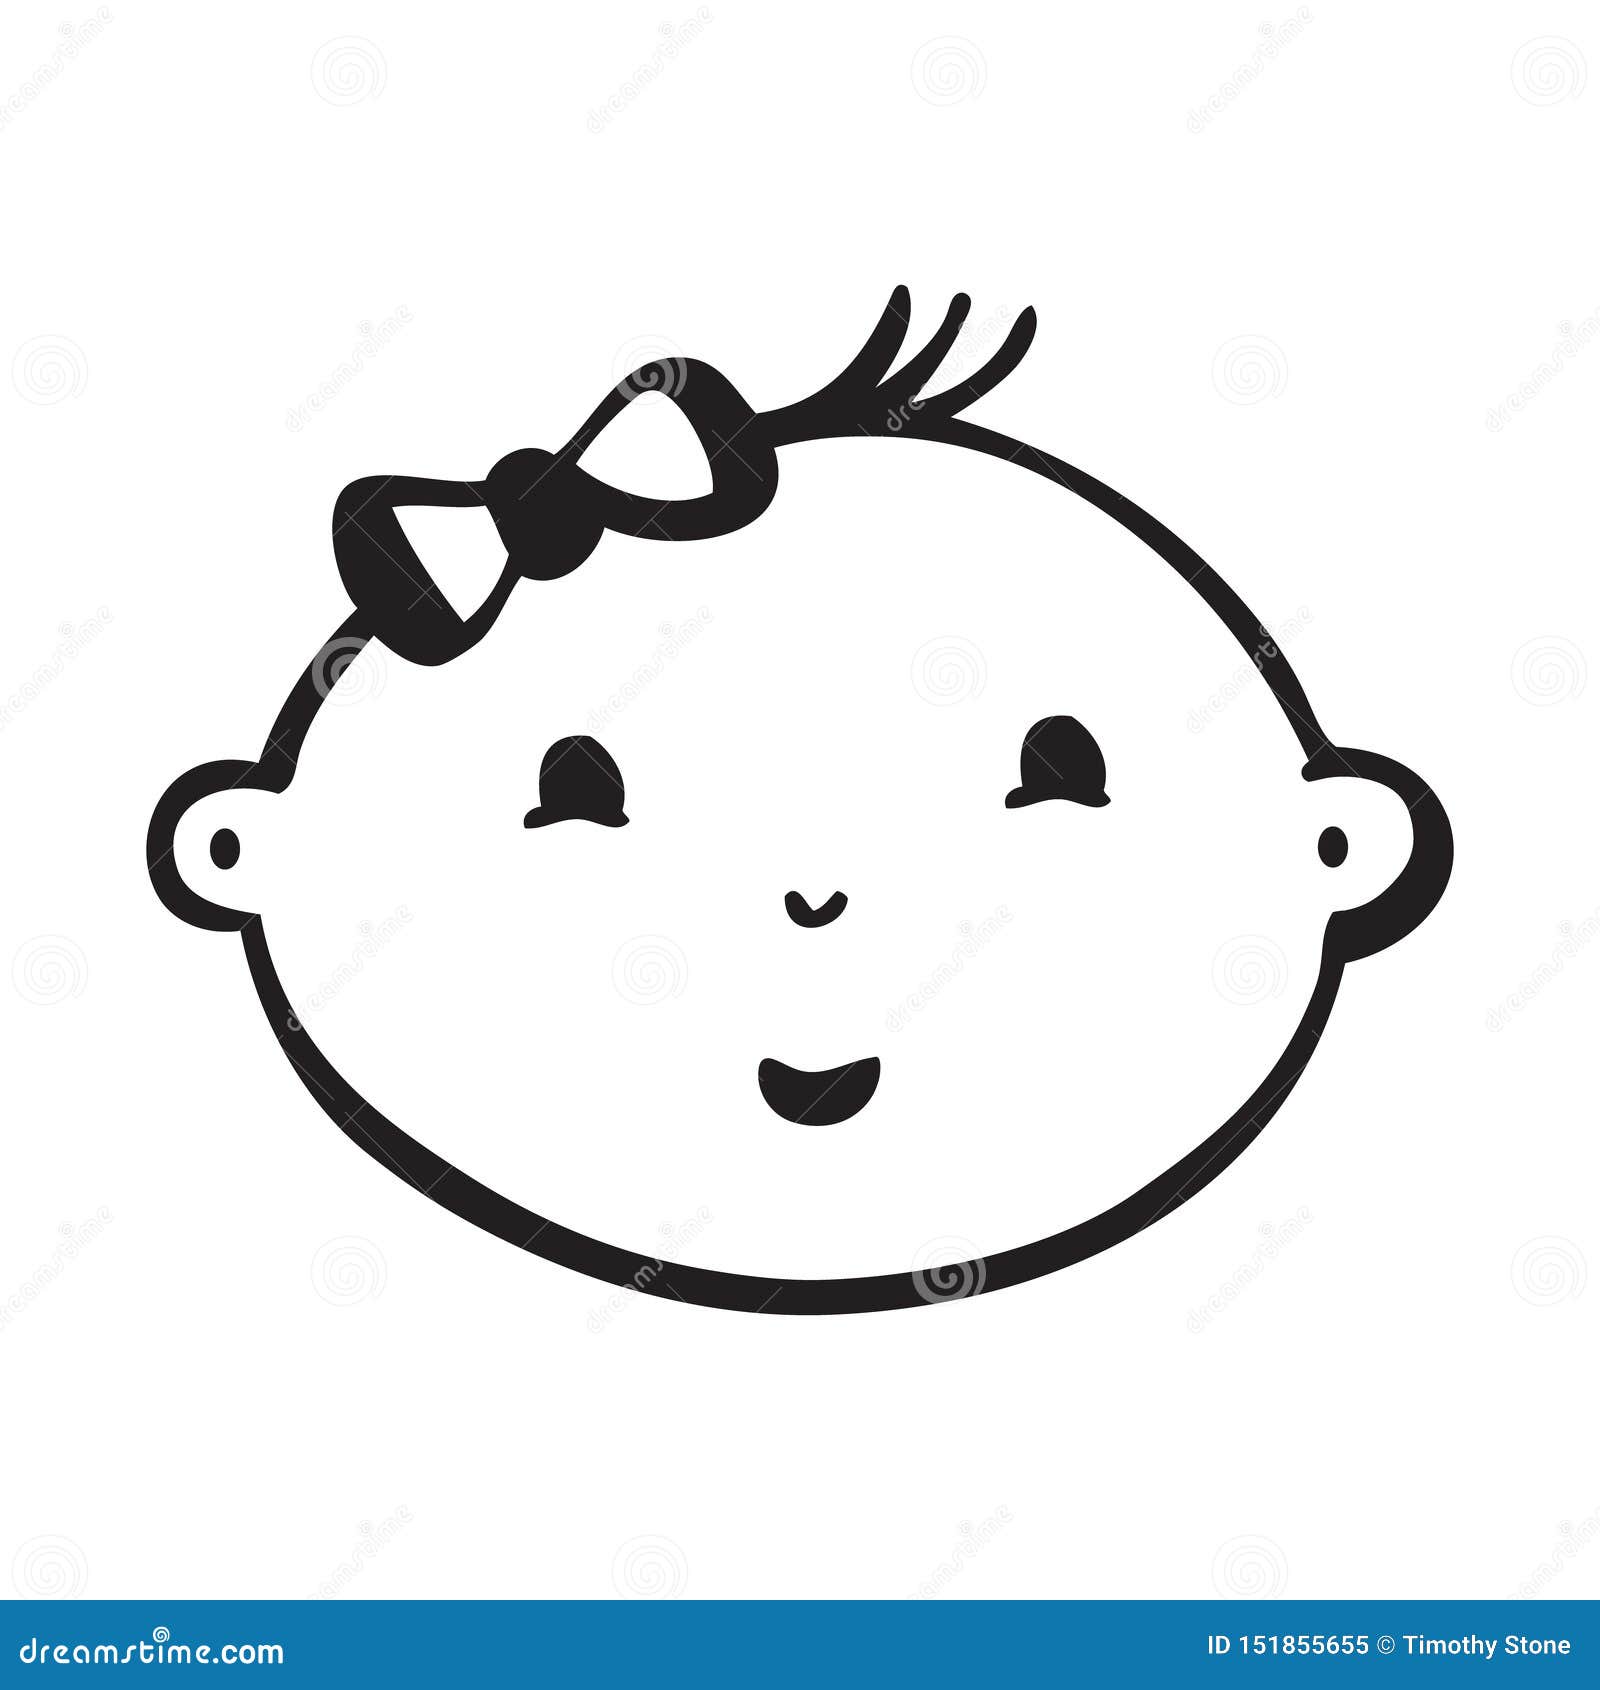 Illustration Two Baby Faces On White Stock Vector (Royalty Free) 118063297  | Shutterstock